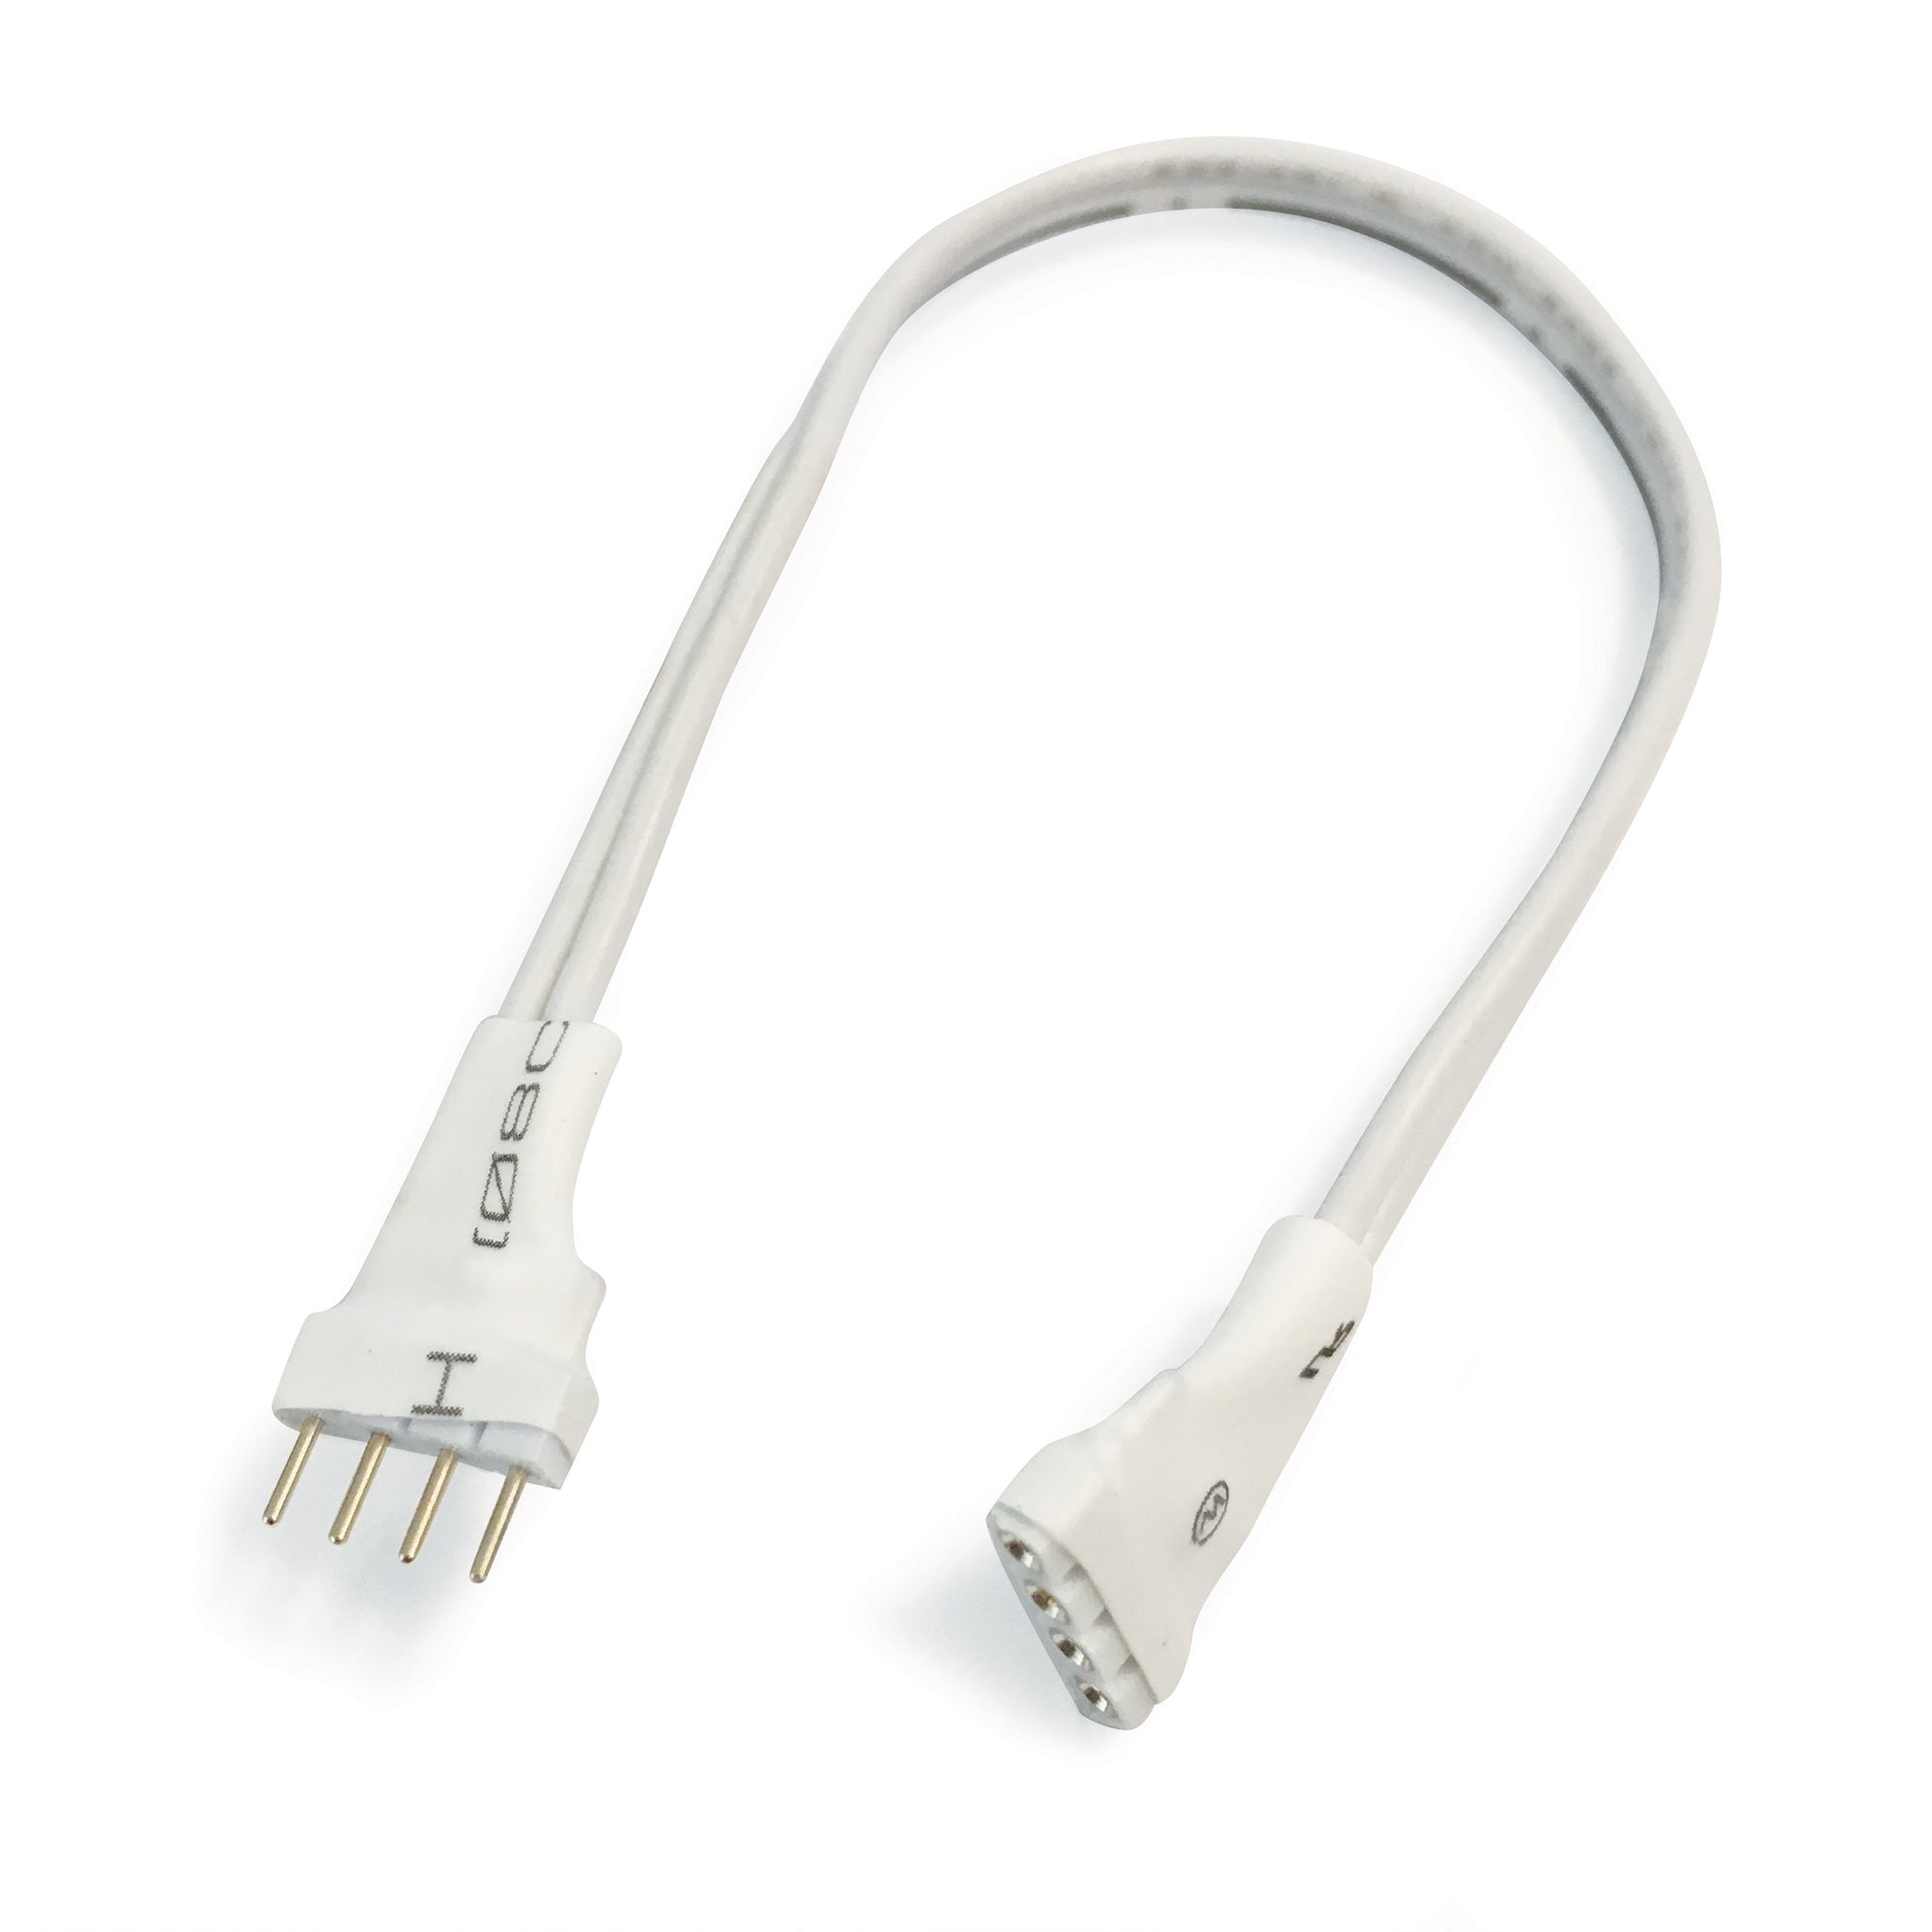 Nora Lighting NARGB-702W - Accent / Undercabinet - 2 Inch Interconnection Cable for 12V or 24V RGB & CCT Tape Light